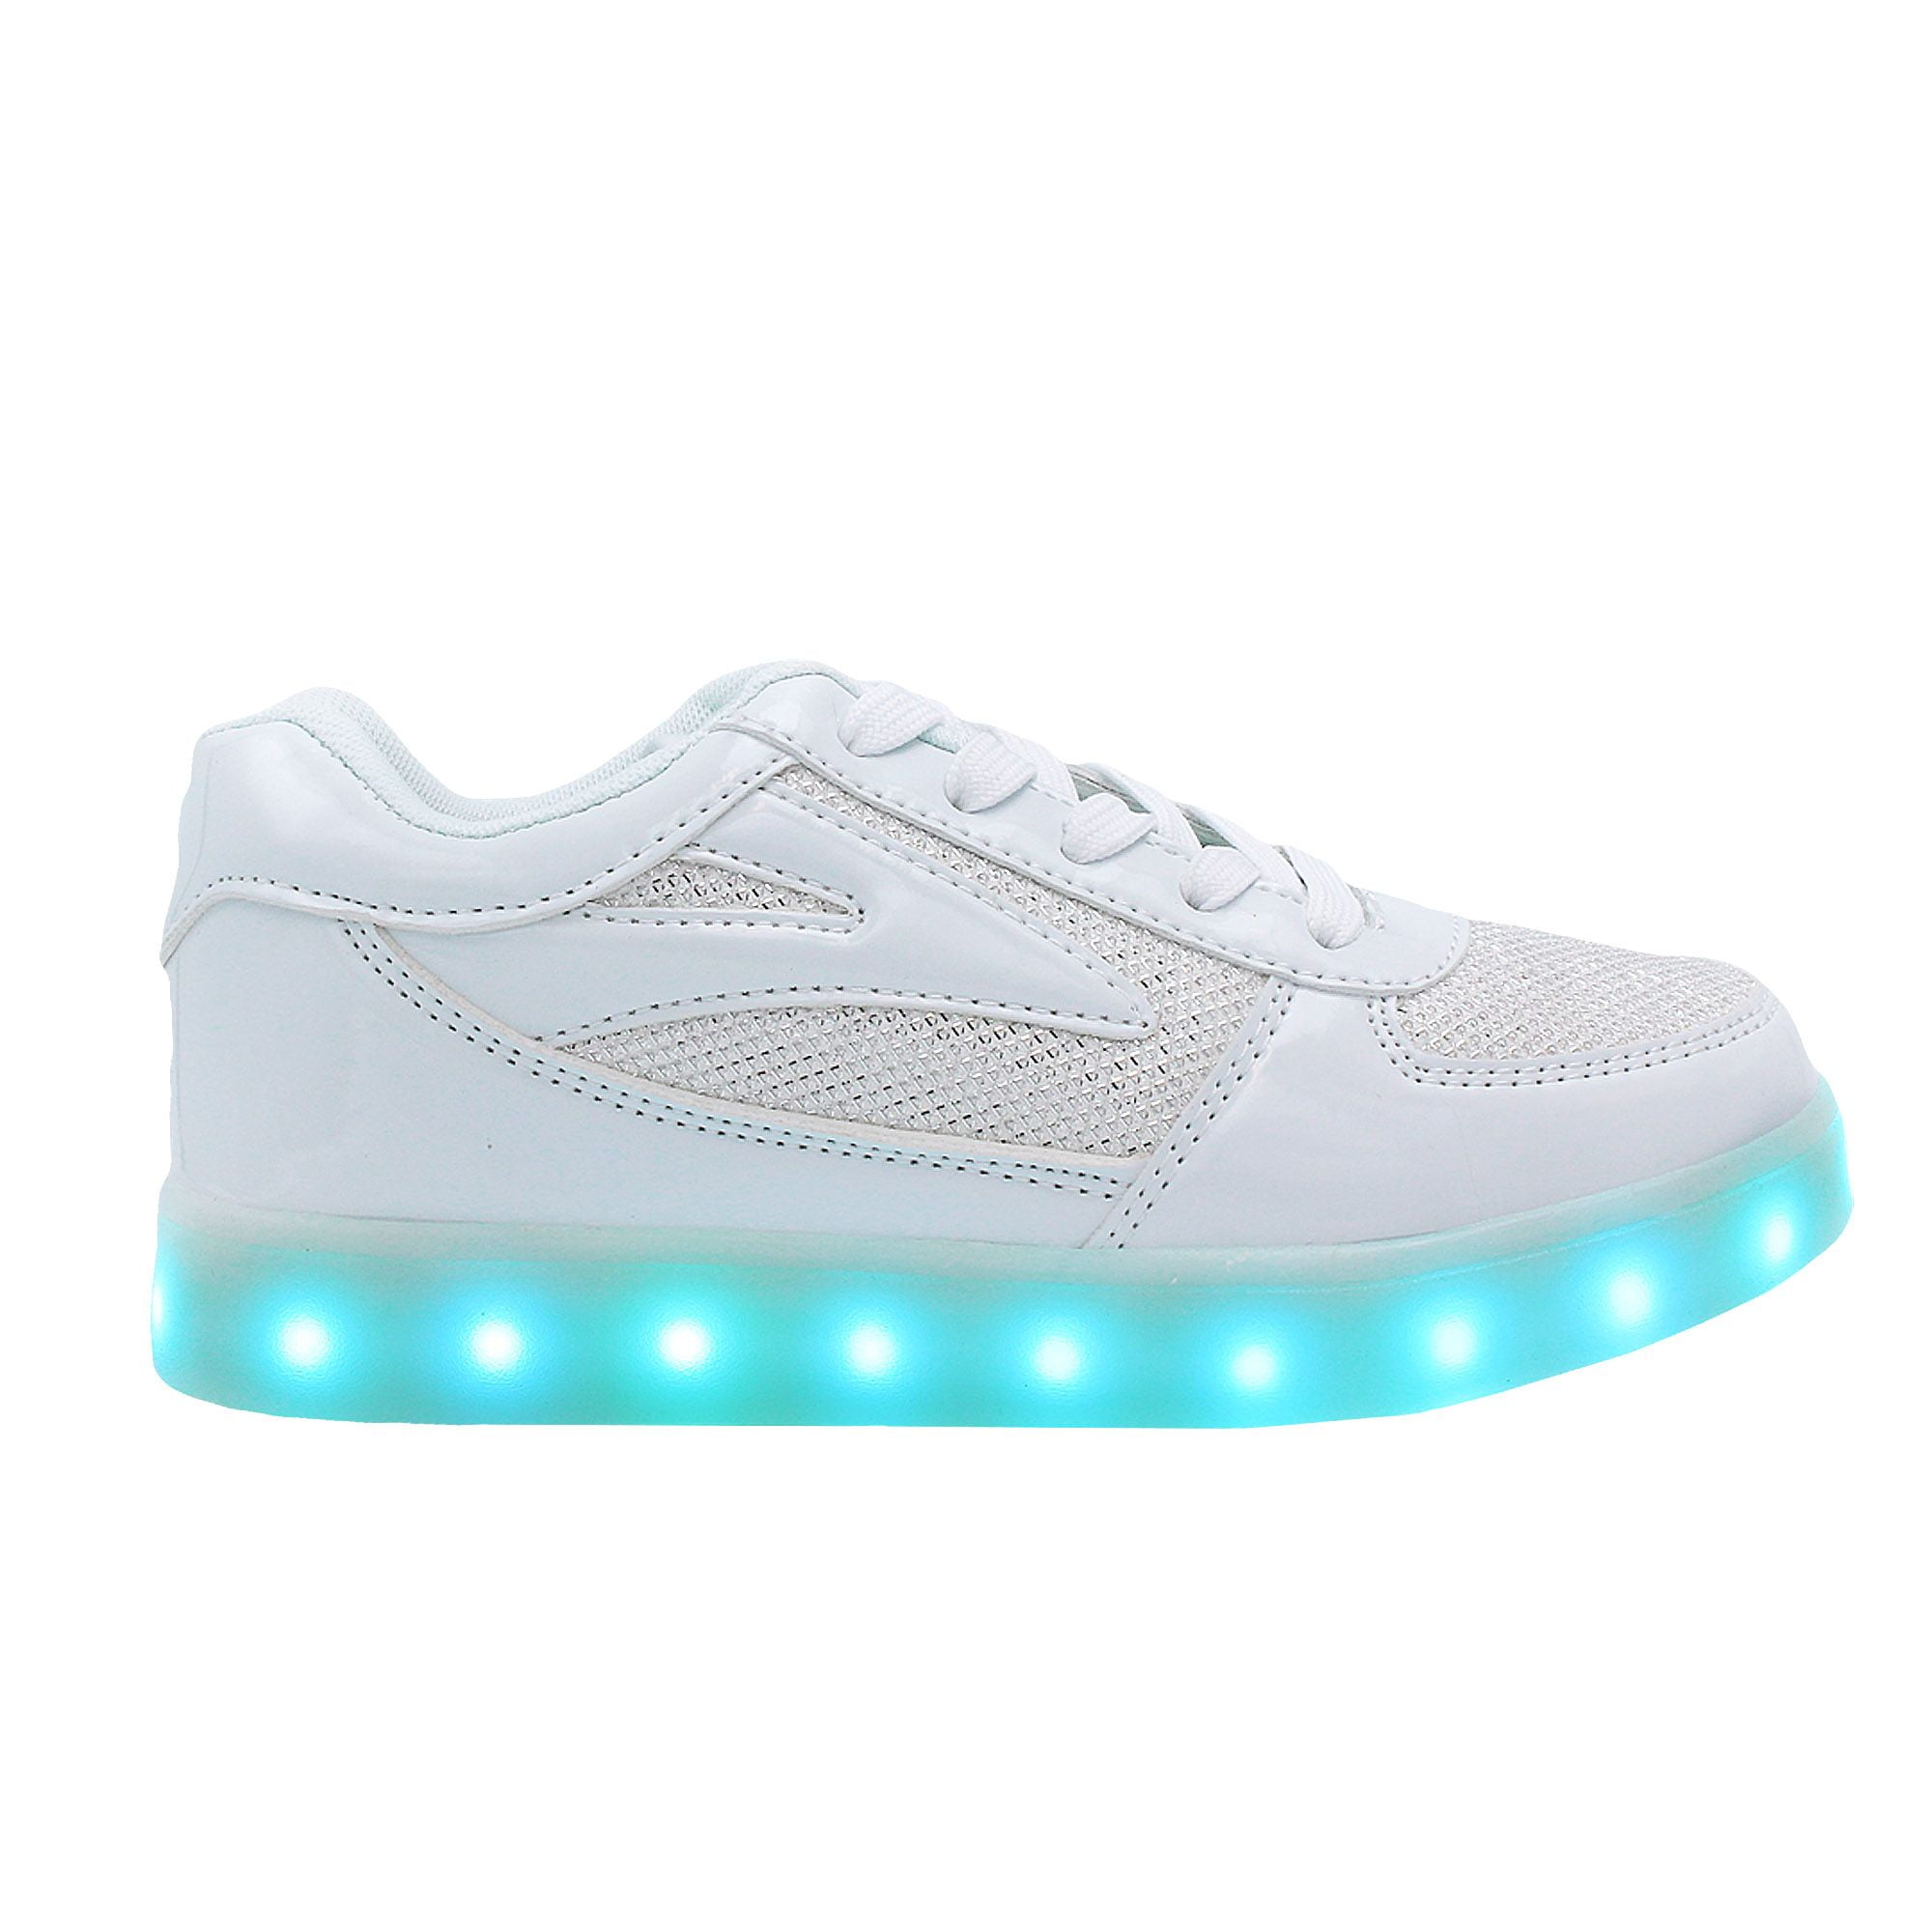 Smiles LED Light Up Sneakers Low Top Adult White Shoes US 5.5 / EU 36 - Walmart.com